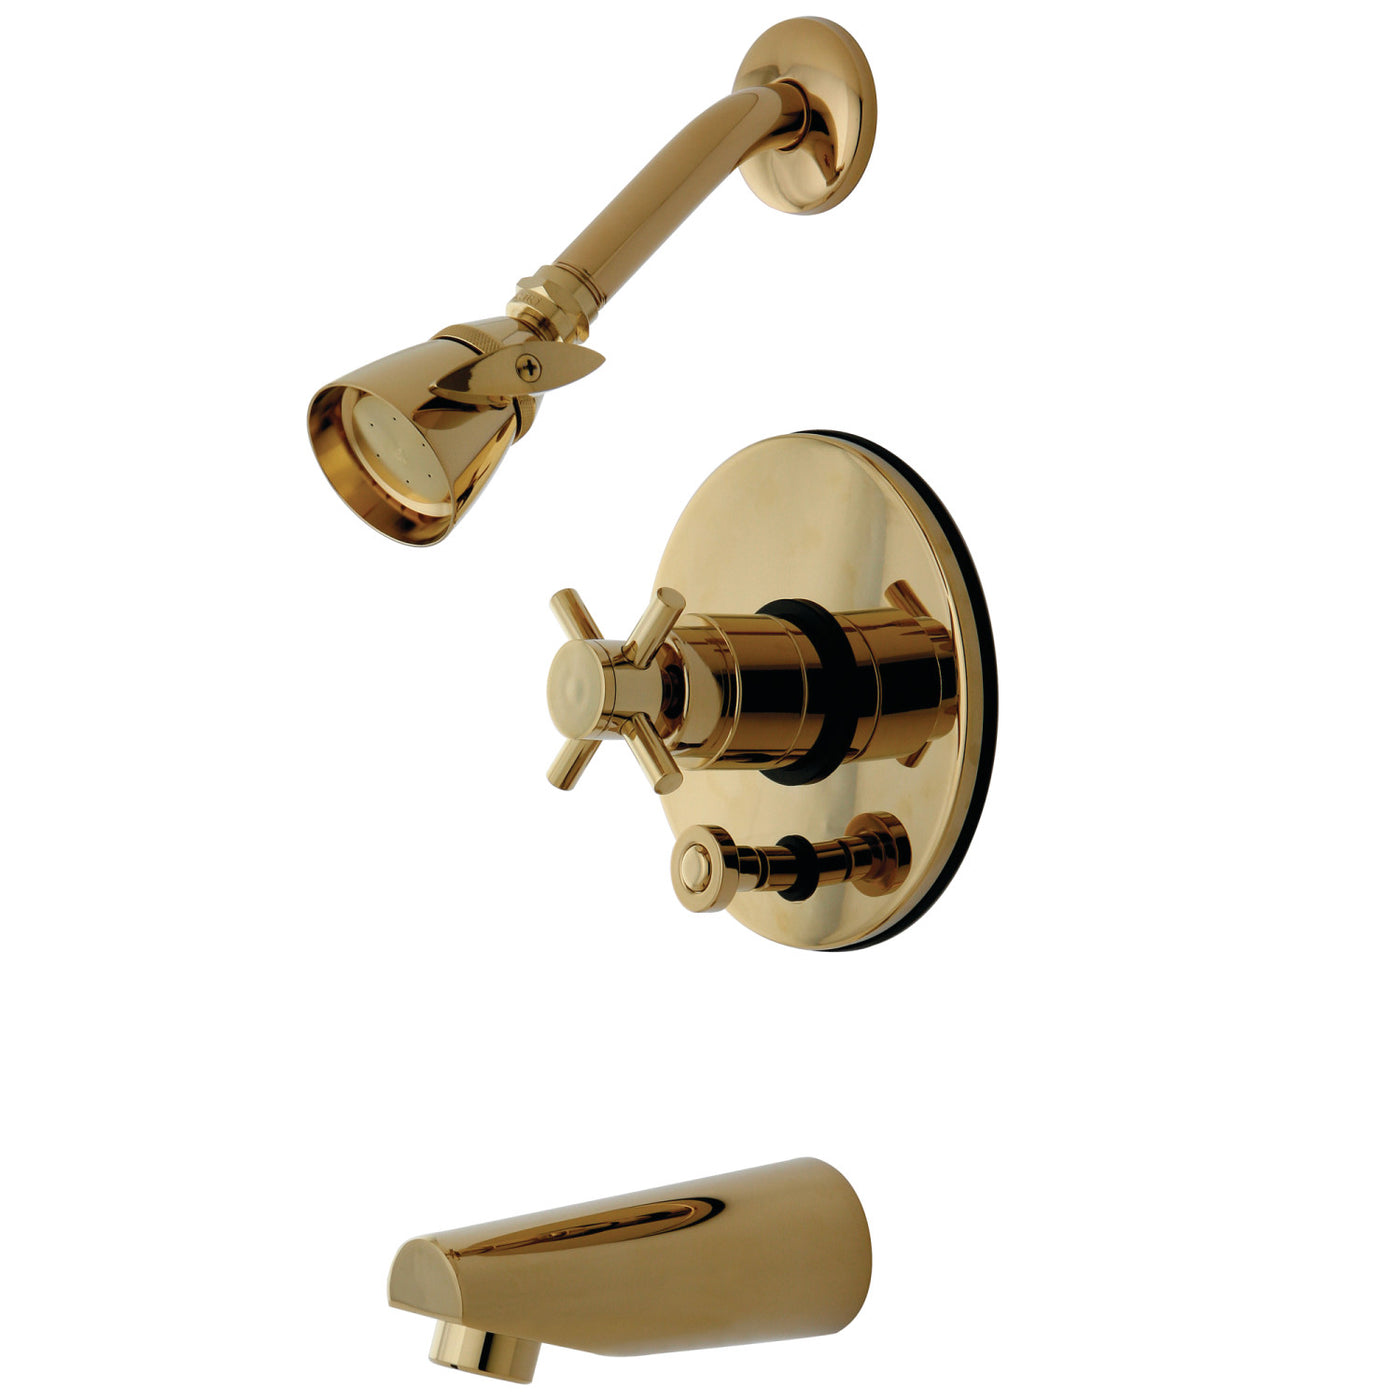 Elements of Design EB86920DX Tub and Shower Faucet with Diverter, Polished Brass